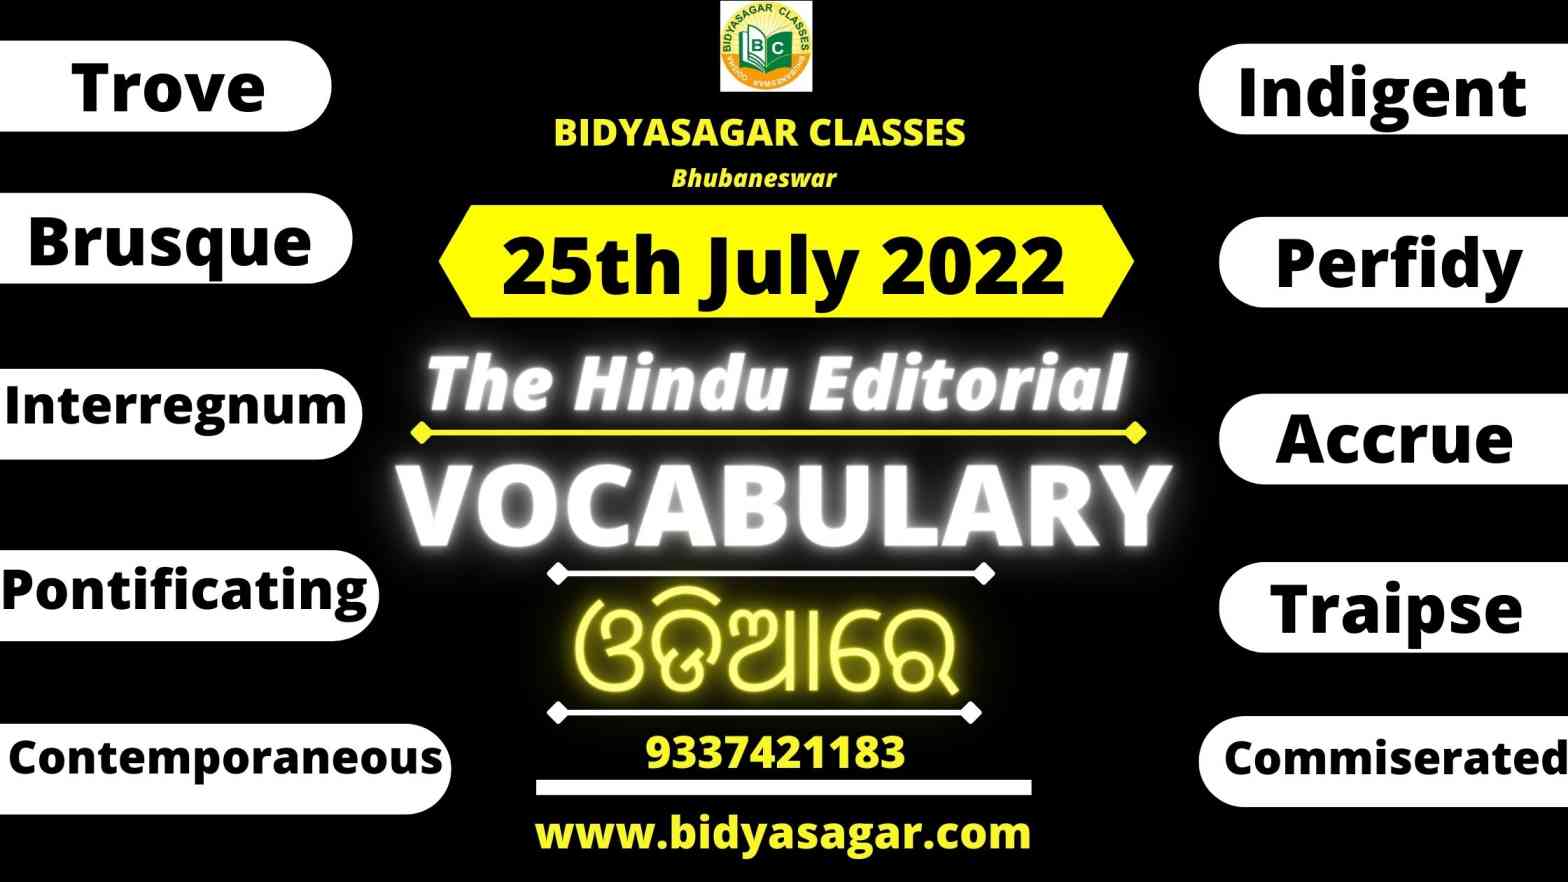 The Hindu Editorial Vocabulary of 25th July 2022